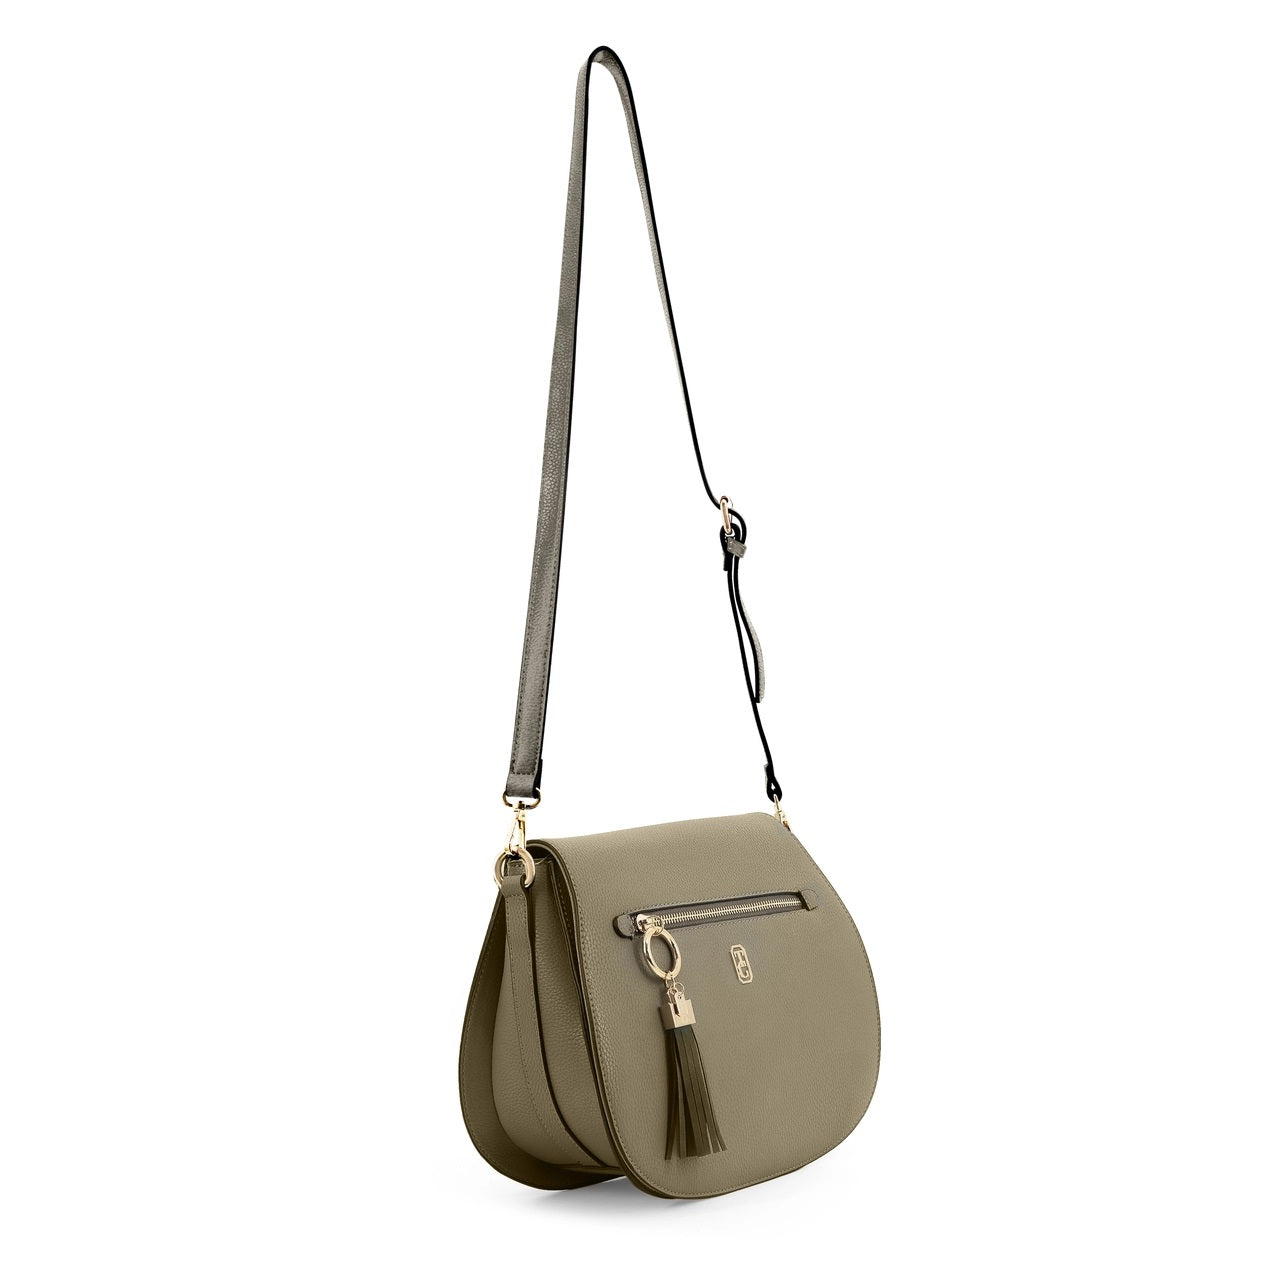 Tipperary Crystal Savoy Large Satchel - Olive NEW 2022  This stylish new addition to our bag collection is proving to be very popular, with an outside zip compartment the Savoy bag is stylish and functional.